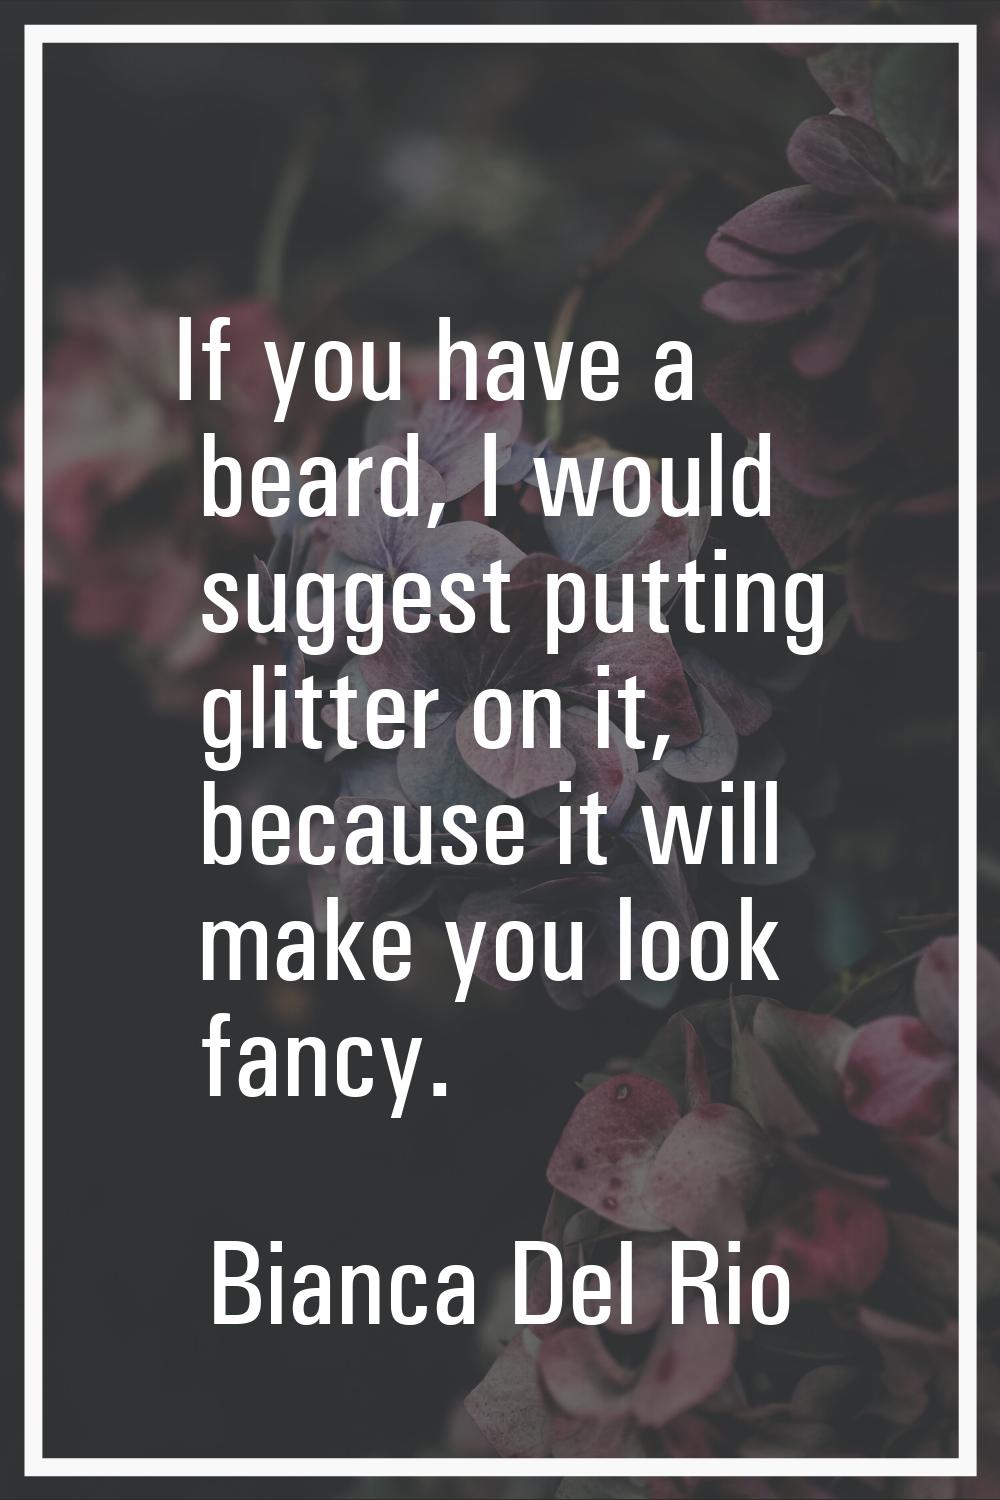 If you have a beard, I would suggest putting glitter on it, because it will make you look fancy.